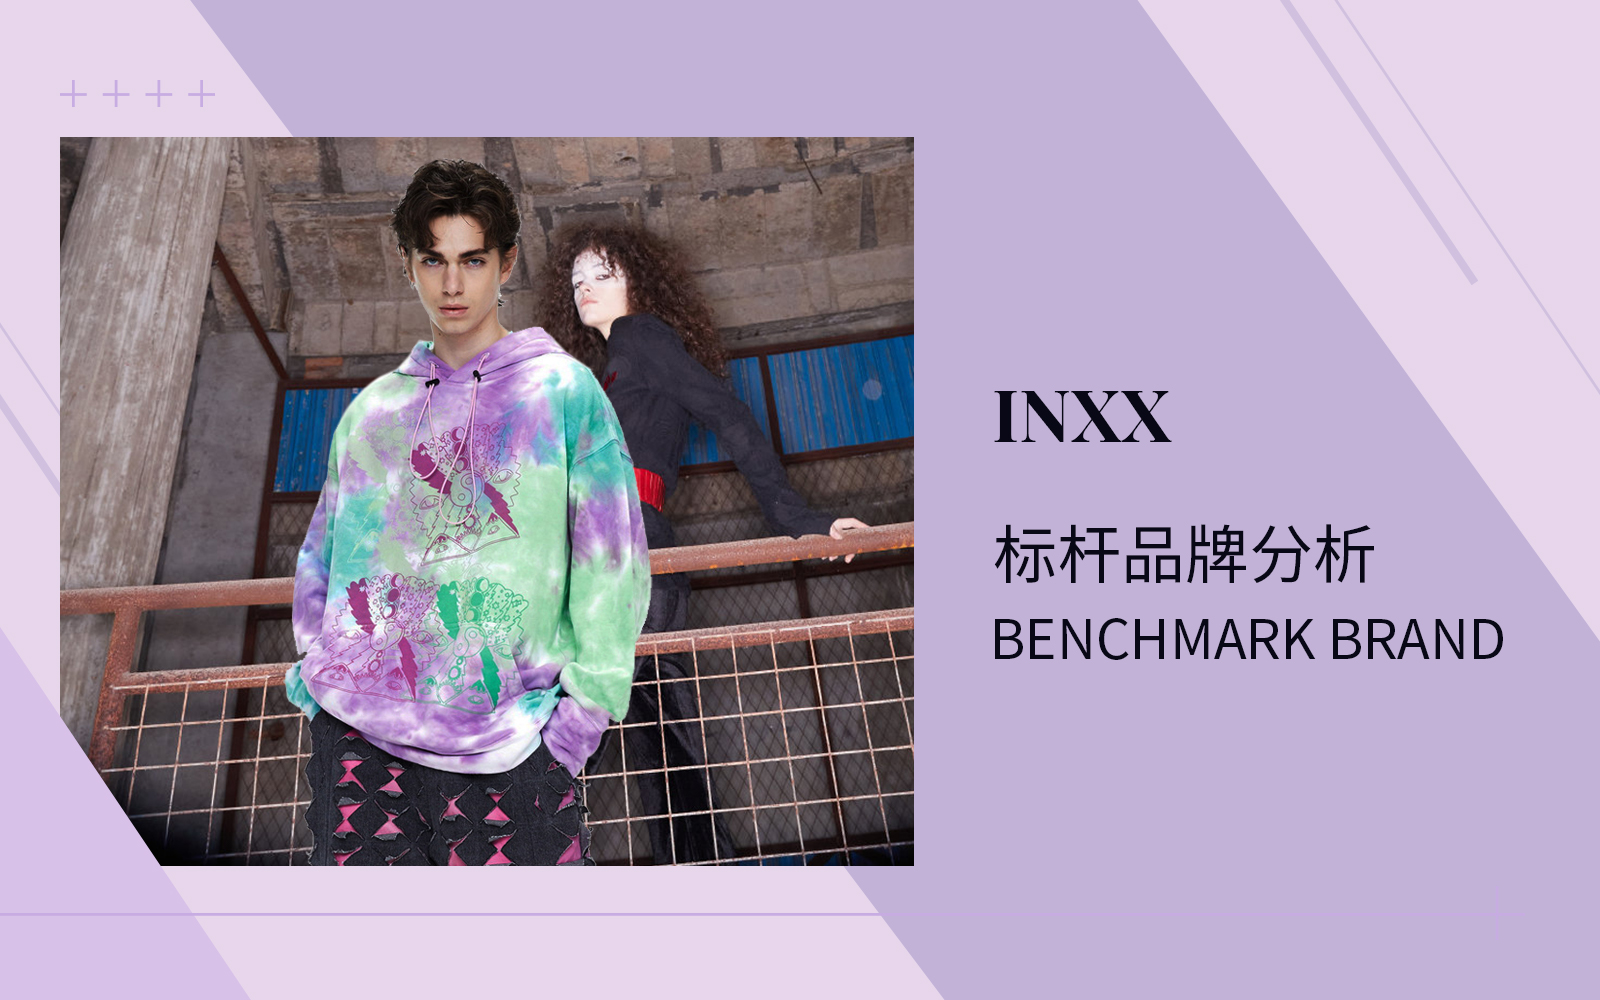 Gender-inclusive -- The Analysis of INXX The Benchmark Menswear Brand